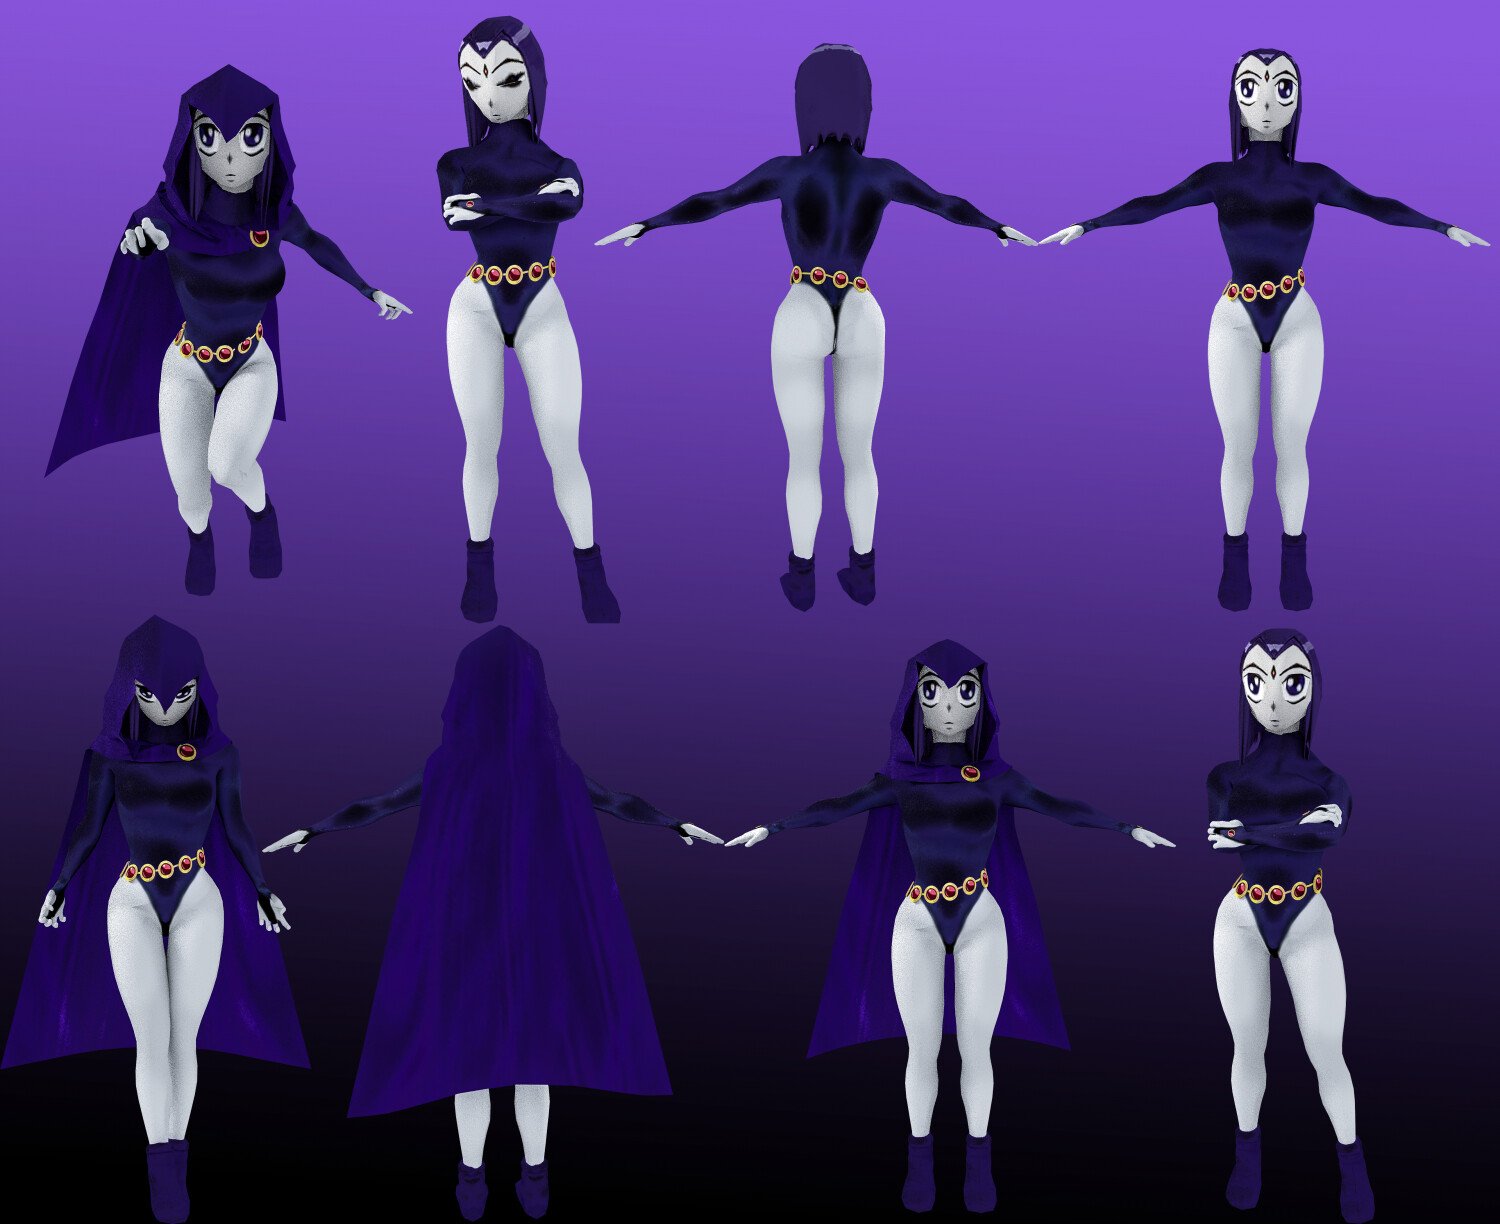 arlene valerio recommends pics of raven from teen titans pic